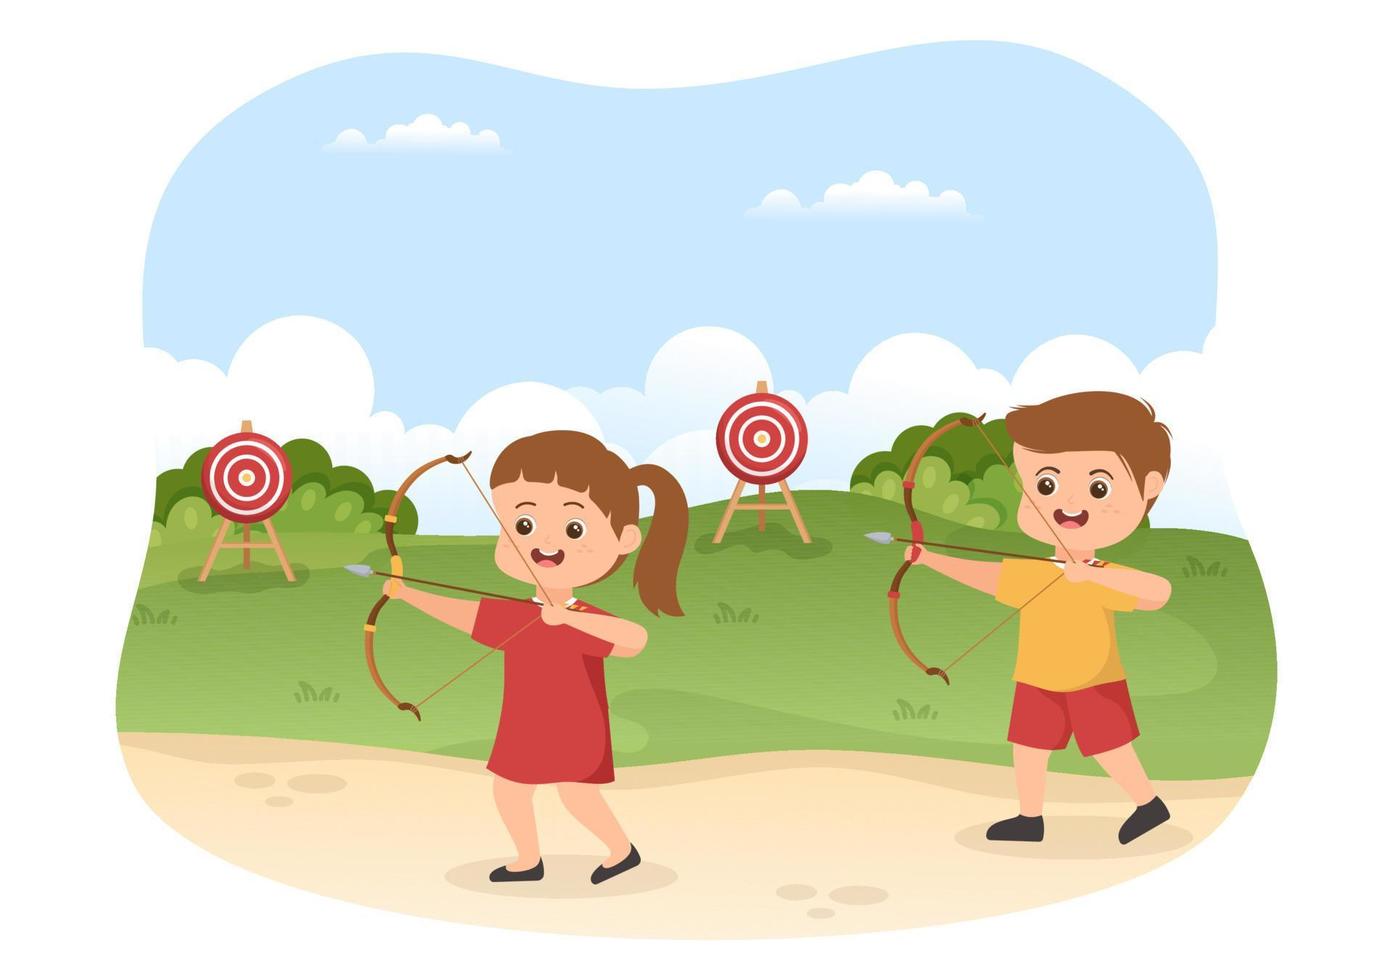 Archery Sport with Kids, Bow and Arrow Pointing at Target for Outdoor Recreational Activity in Flat Cartoon Hand Drawn Template Illustration vector